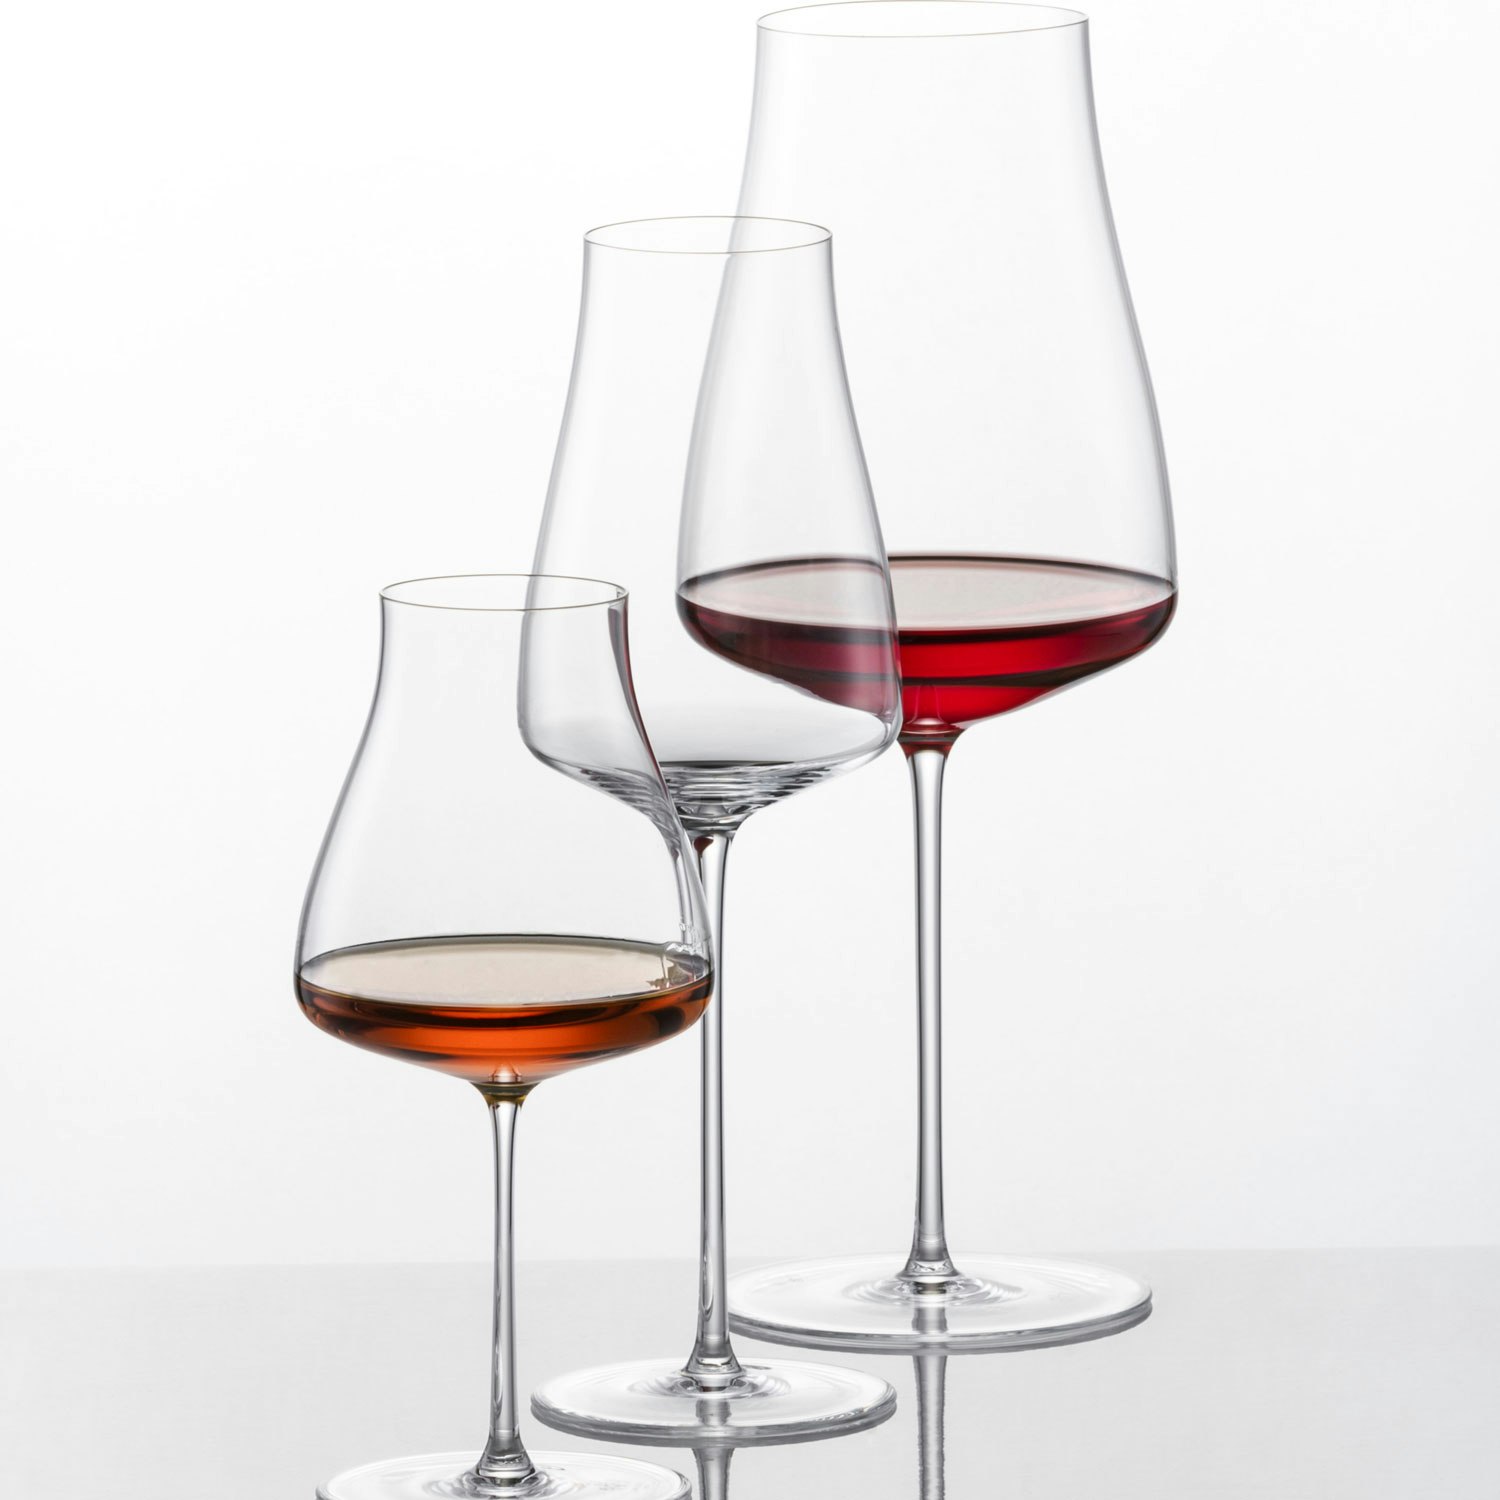 https://royaldesign.com/image/2/zwiesel-the-moment-bordeaux-red-wine-glass-86-cl-2-pack-2